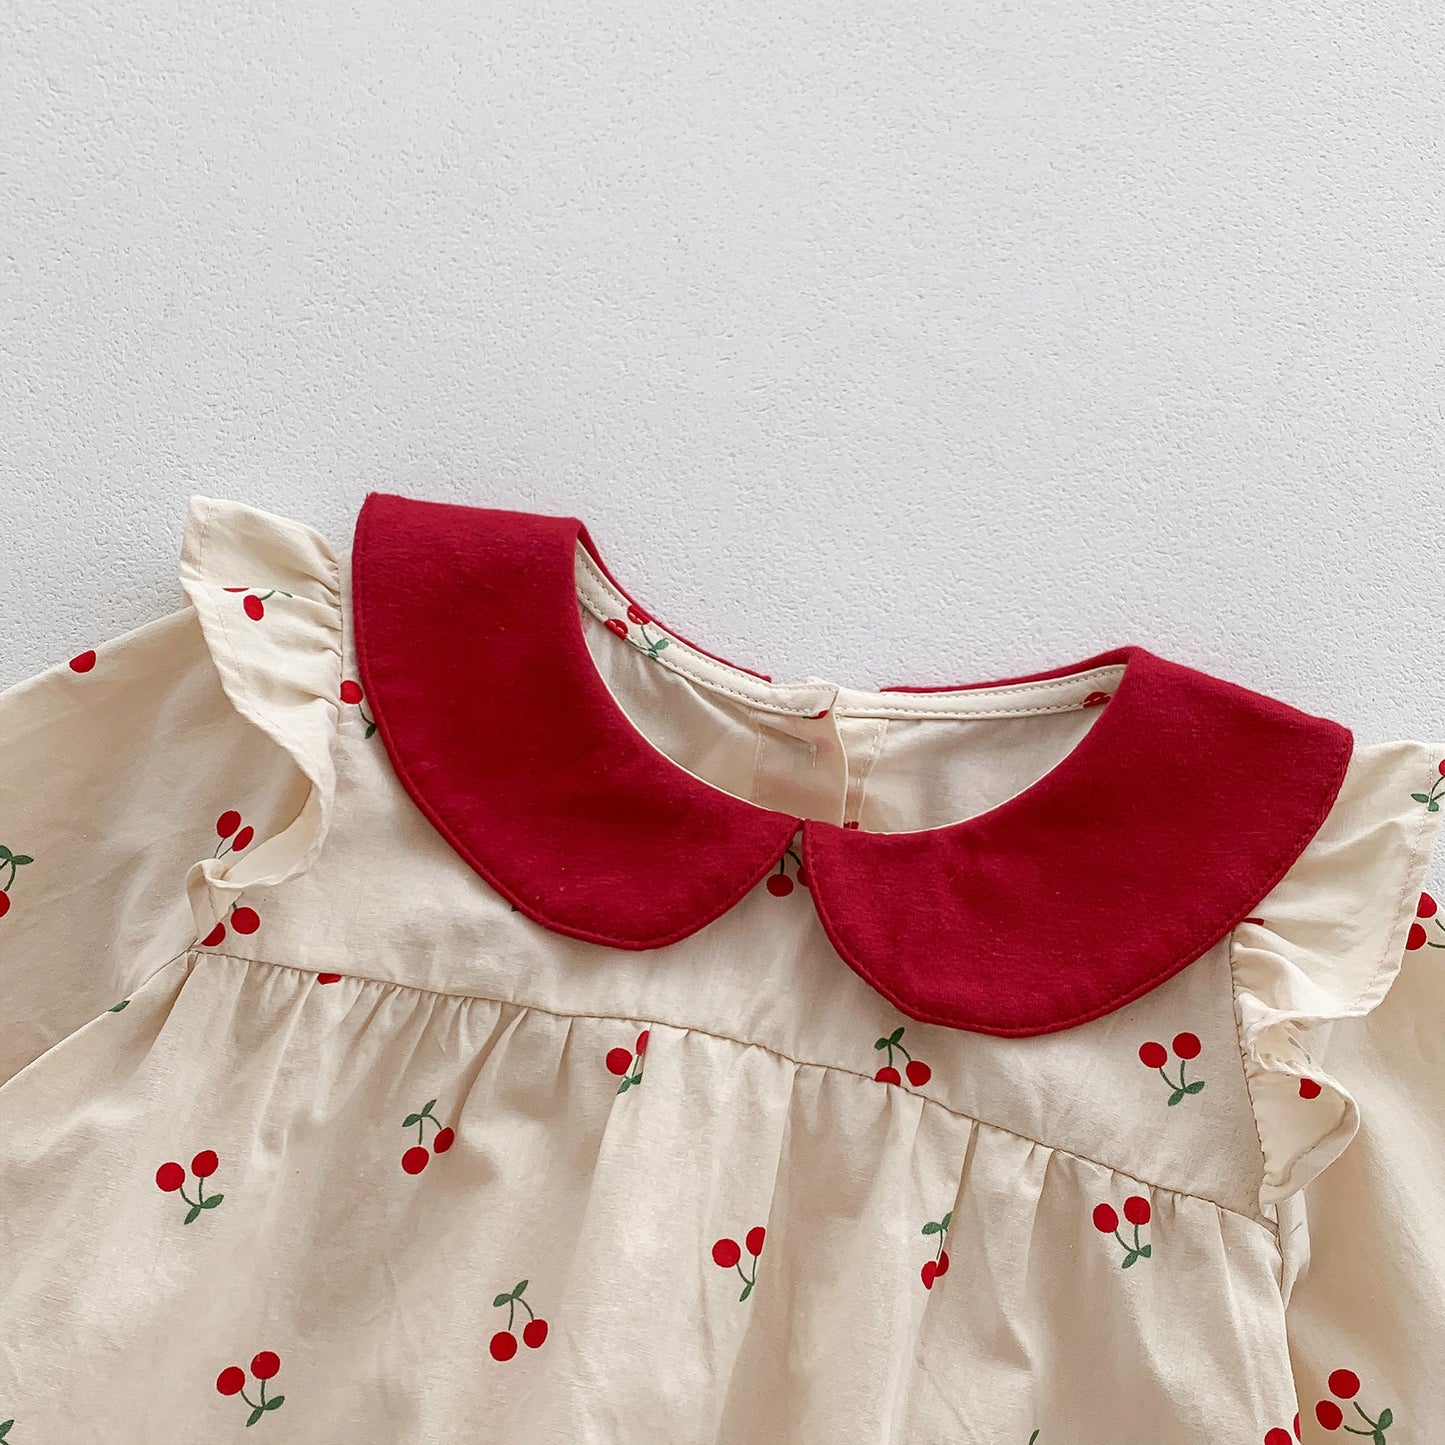 New Arrival Baby Cherry Printing Onesie For Girls With Peter Pan Collar